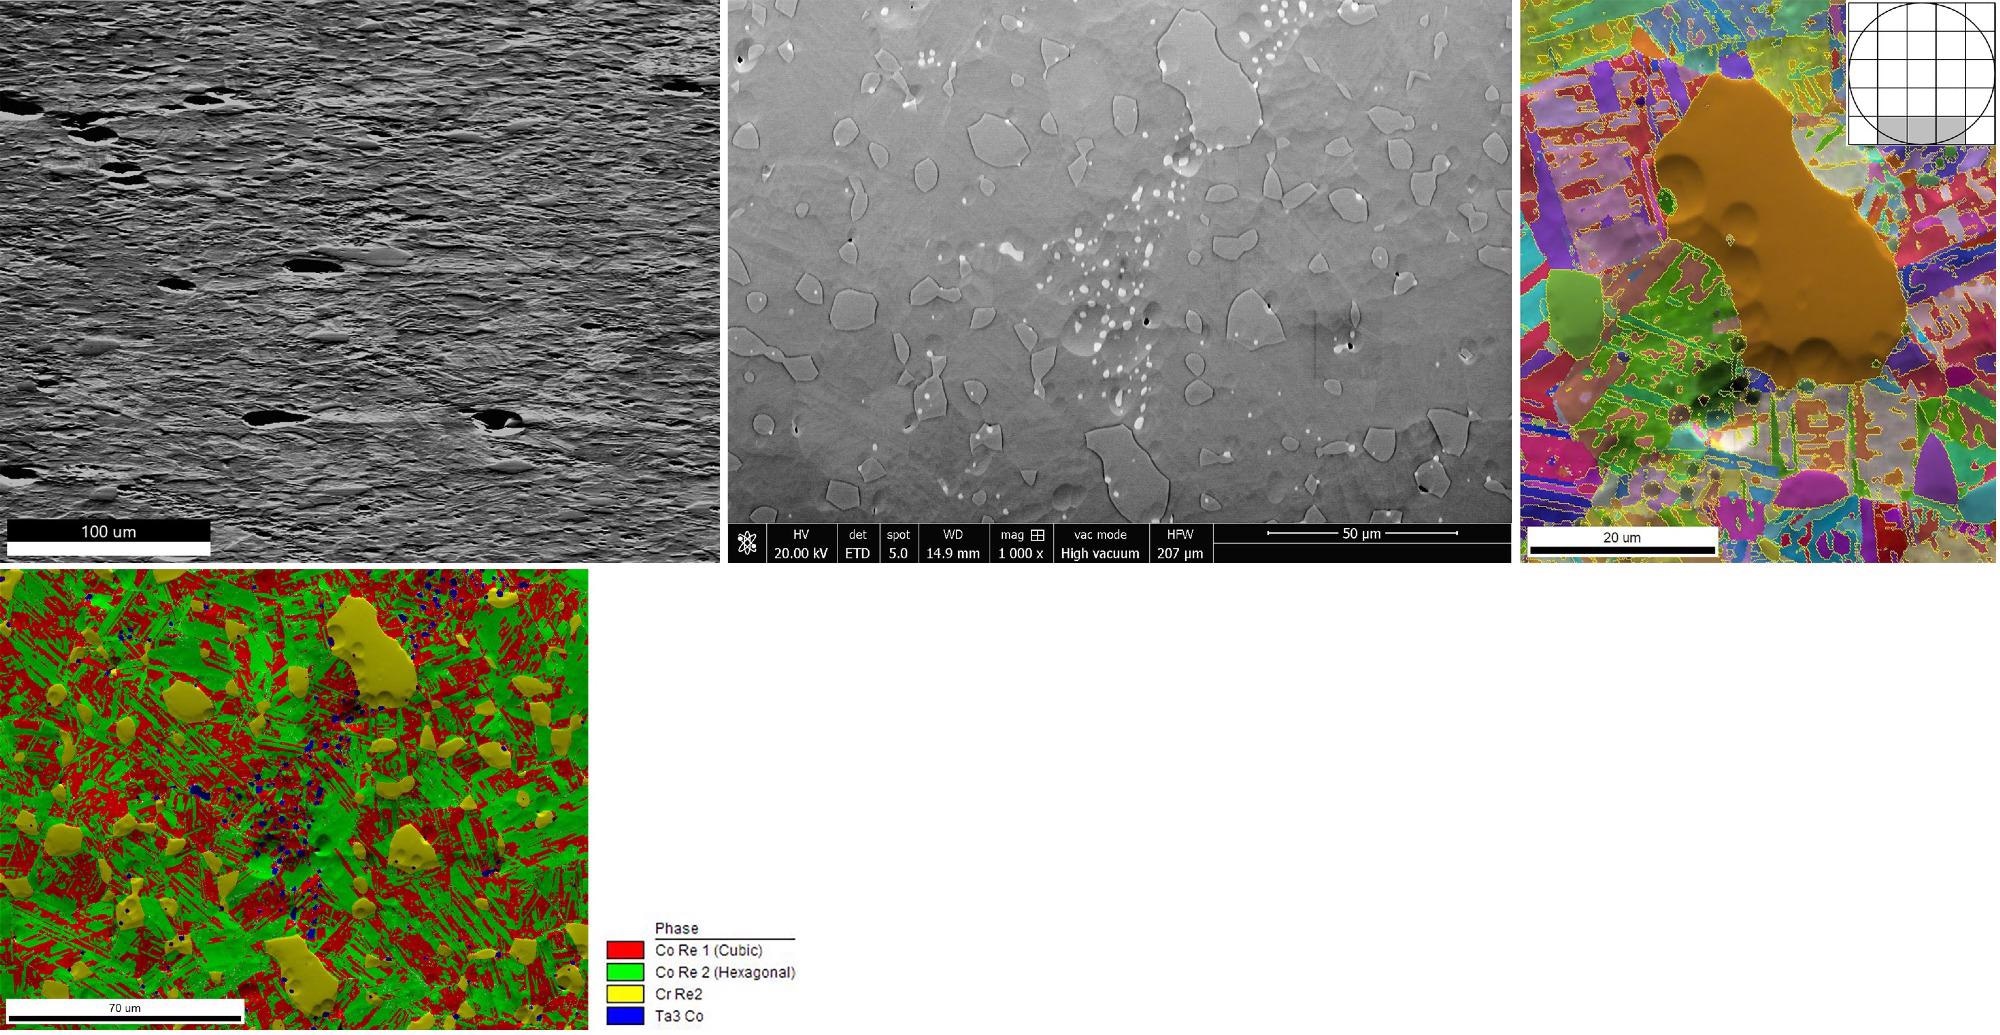 (top row) (left) Forescatter electron image of the mechanically polished sample in a tilted position. (center) SEM secondary electron image of the sample after ion milling (horizontal). A smooth topography across grain boundaries has replaced the sharp edges at grain and phase boundaries. (right) A detailed EBSD IPF on PRIAS™ bottom map of a large CrRe2 grain in a matrix of hexagonal and cubic CoRe grains. The PRIAS image is generated by summing the EBSD pattern intensity along a strip at the bottom of the pattern for each point and is very sensitive to topography. Yellow lines indicate phase boundaries. The grain and phase boundaries do not coincide with a topographical change anymore, and accurate analysis is possible. (bottom row) EBSD phase map on PRIAS bottom image.